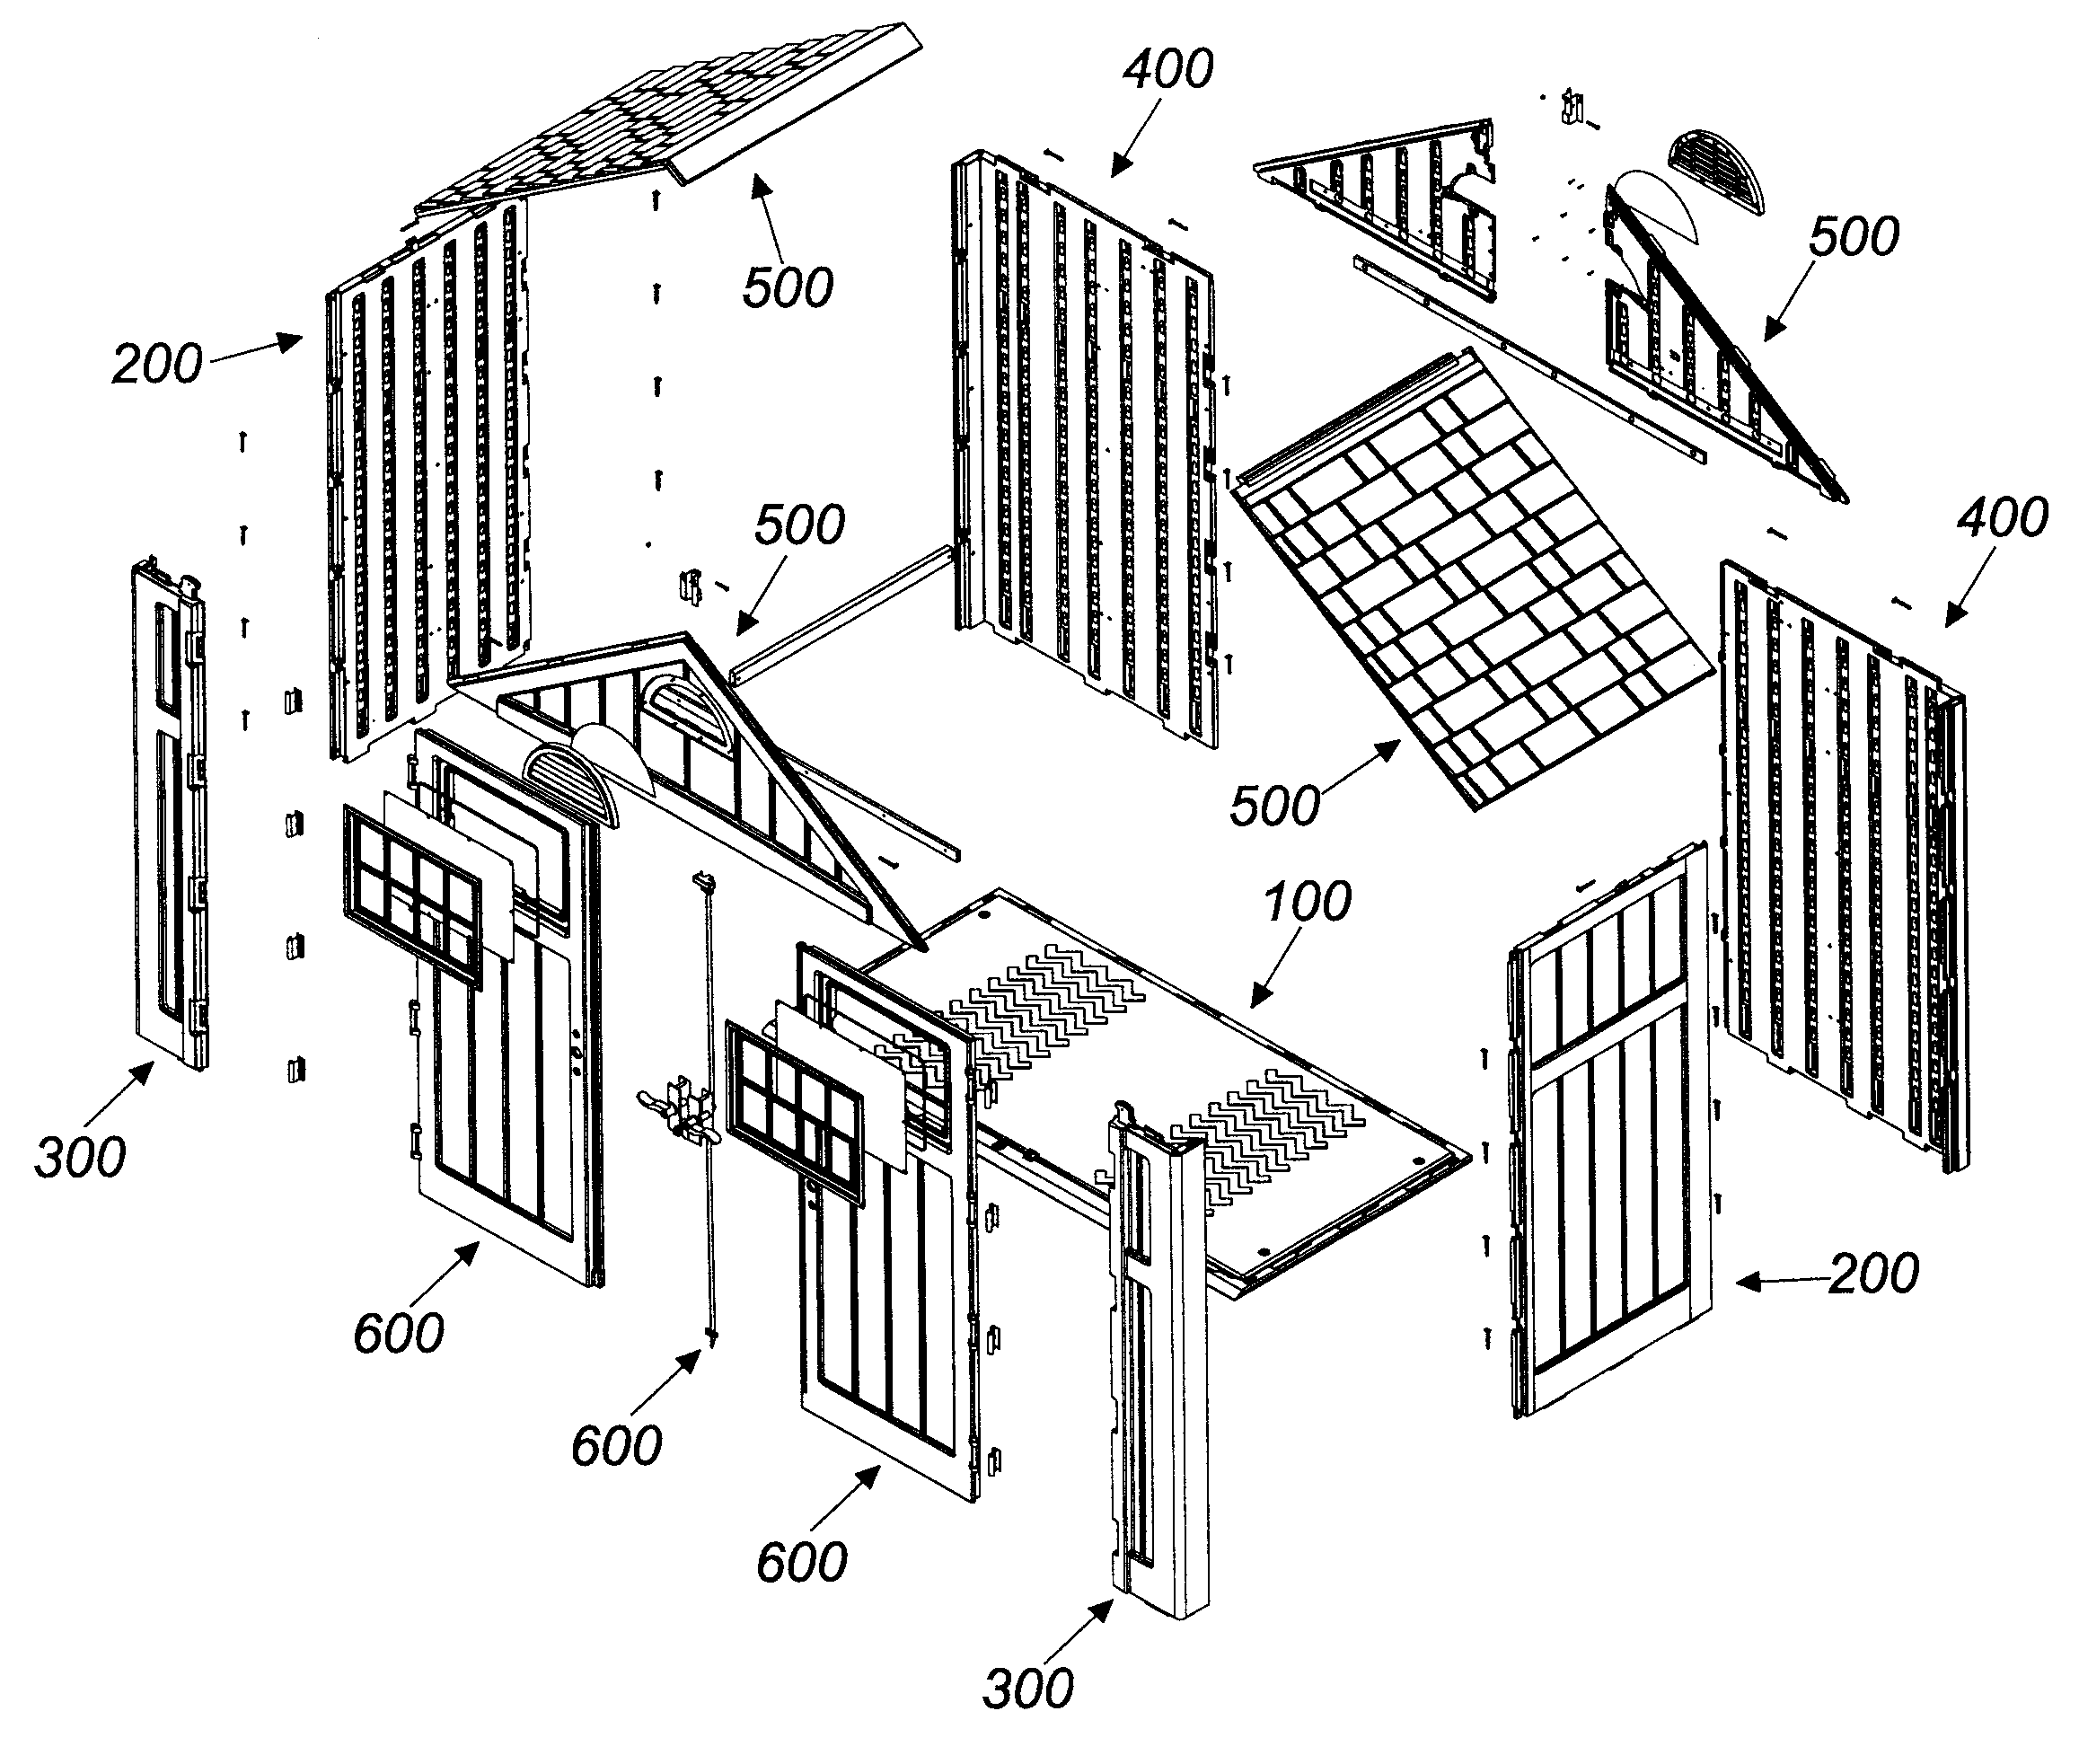 Modular blow molded shed with connectors